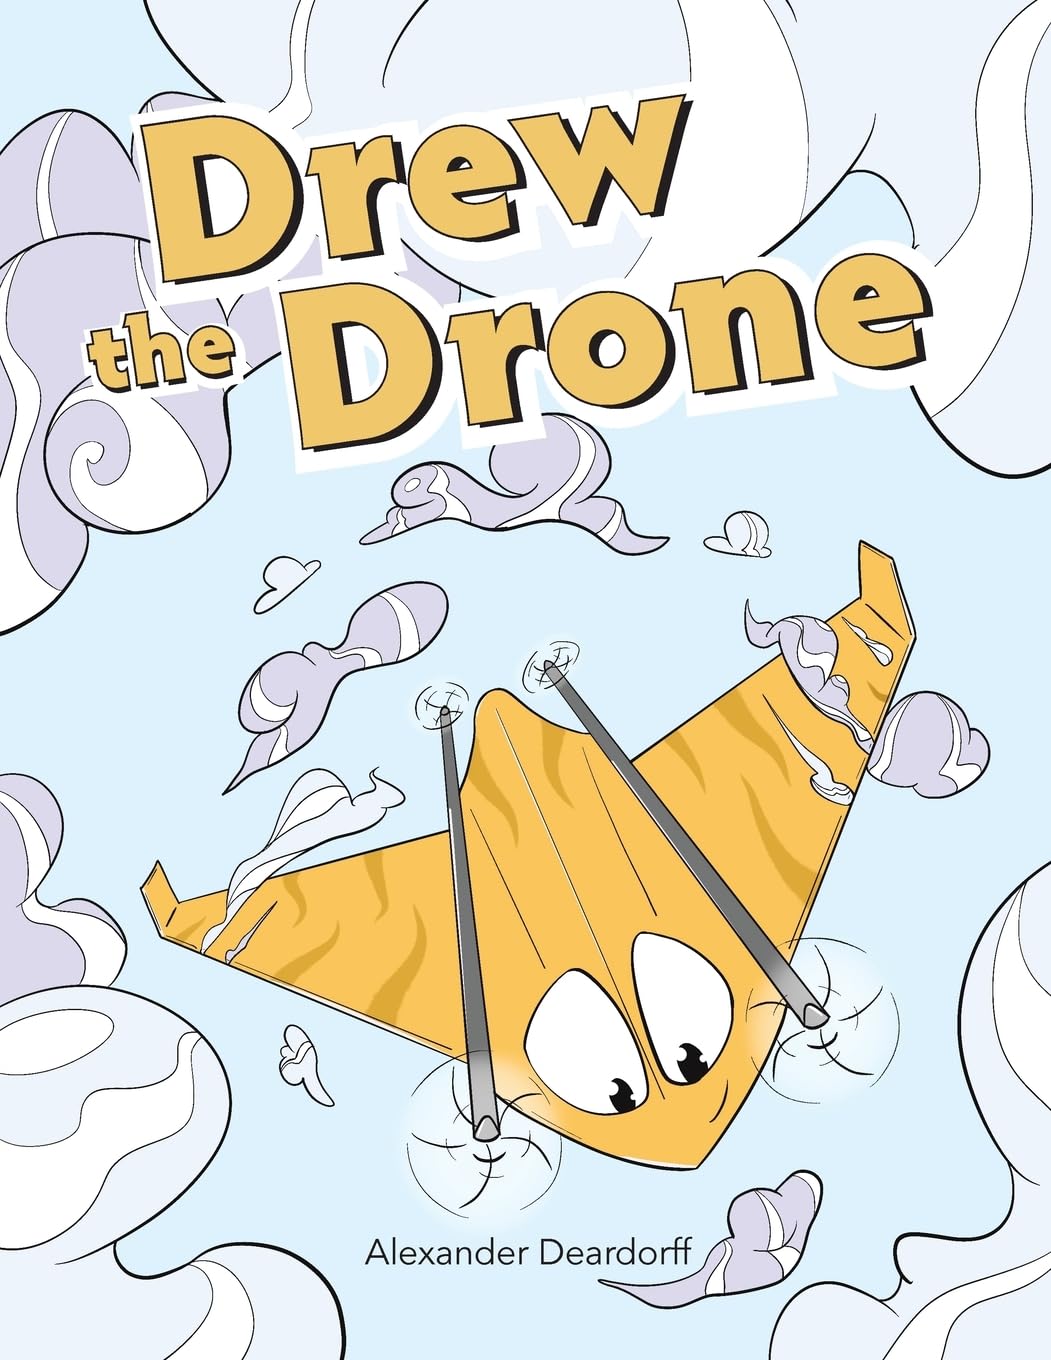 New children’s book "Drew the Drone" by Alexander Deardorff is released, a military-themed story that teaches readers about making responsible decisions and considering unforeseen consequences